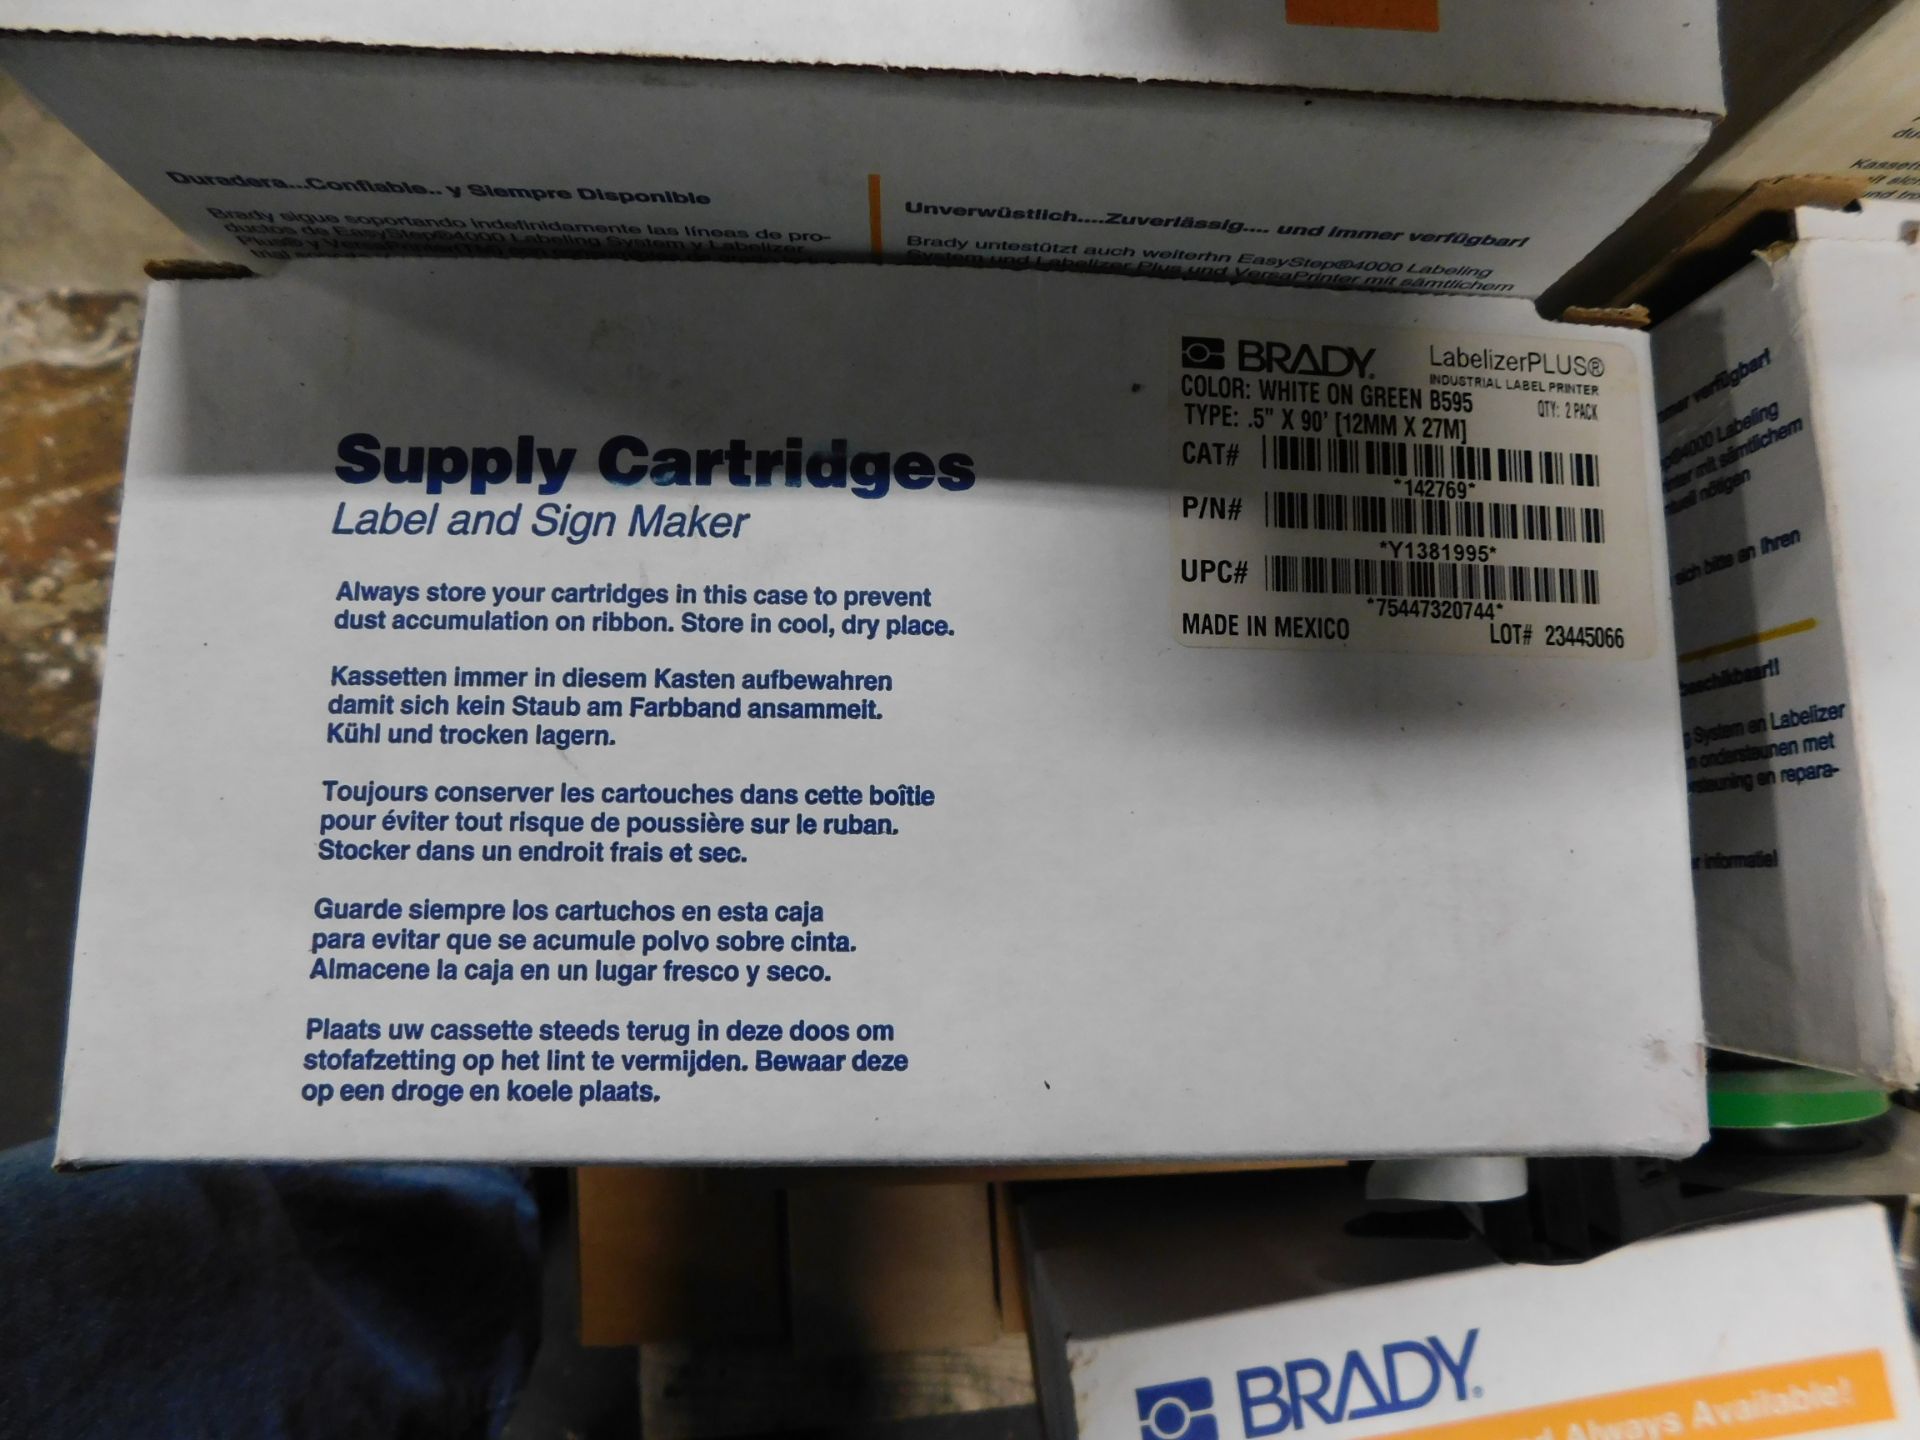 LOT OF NEW BRADY LABELS AND PRINTER SUPPLIES - Image 8 of 8